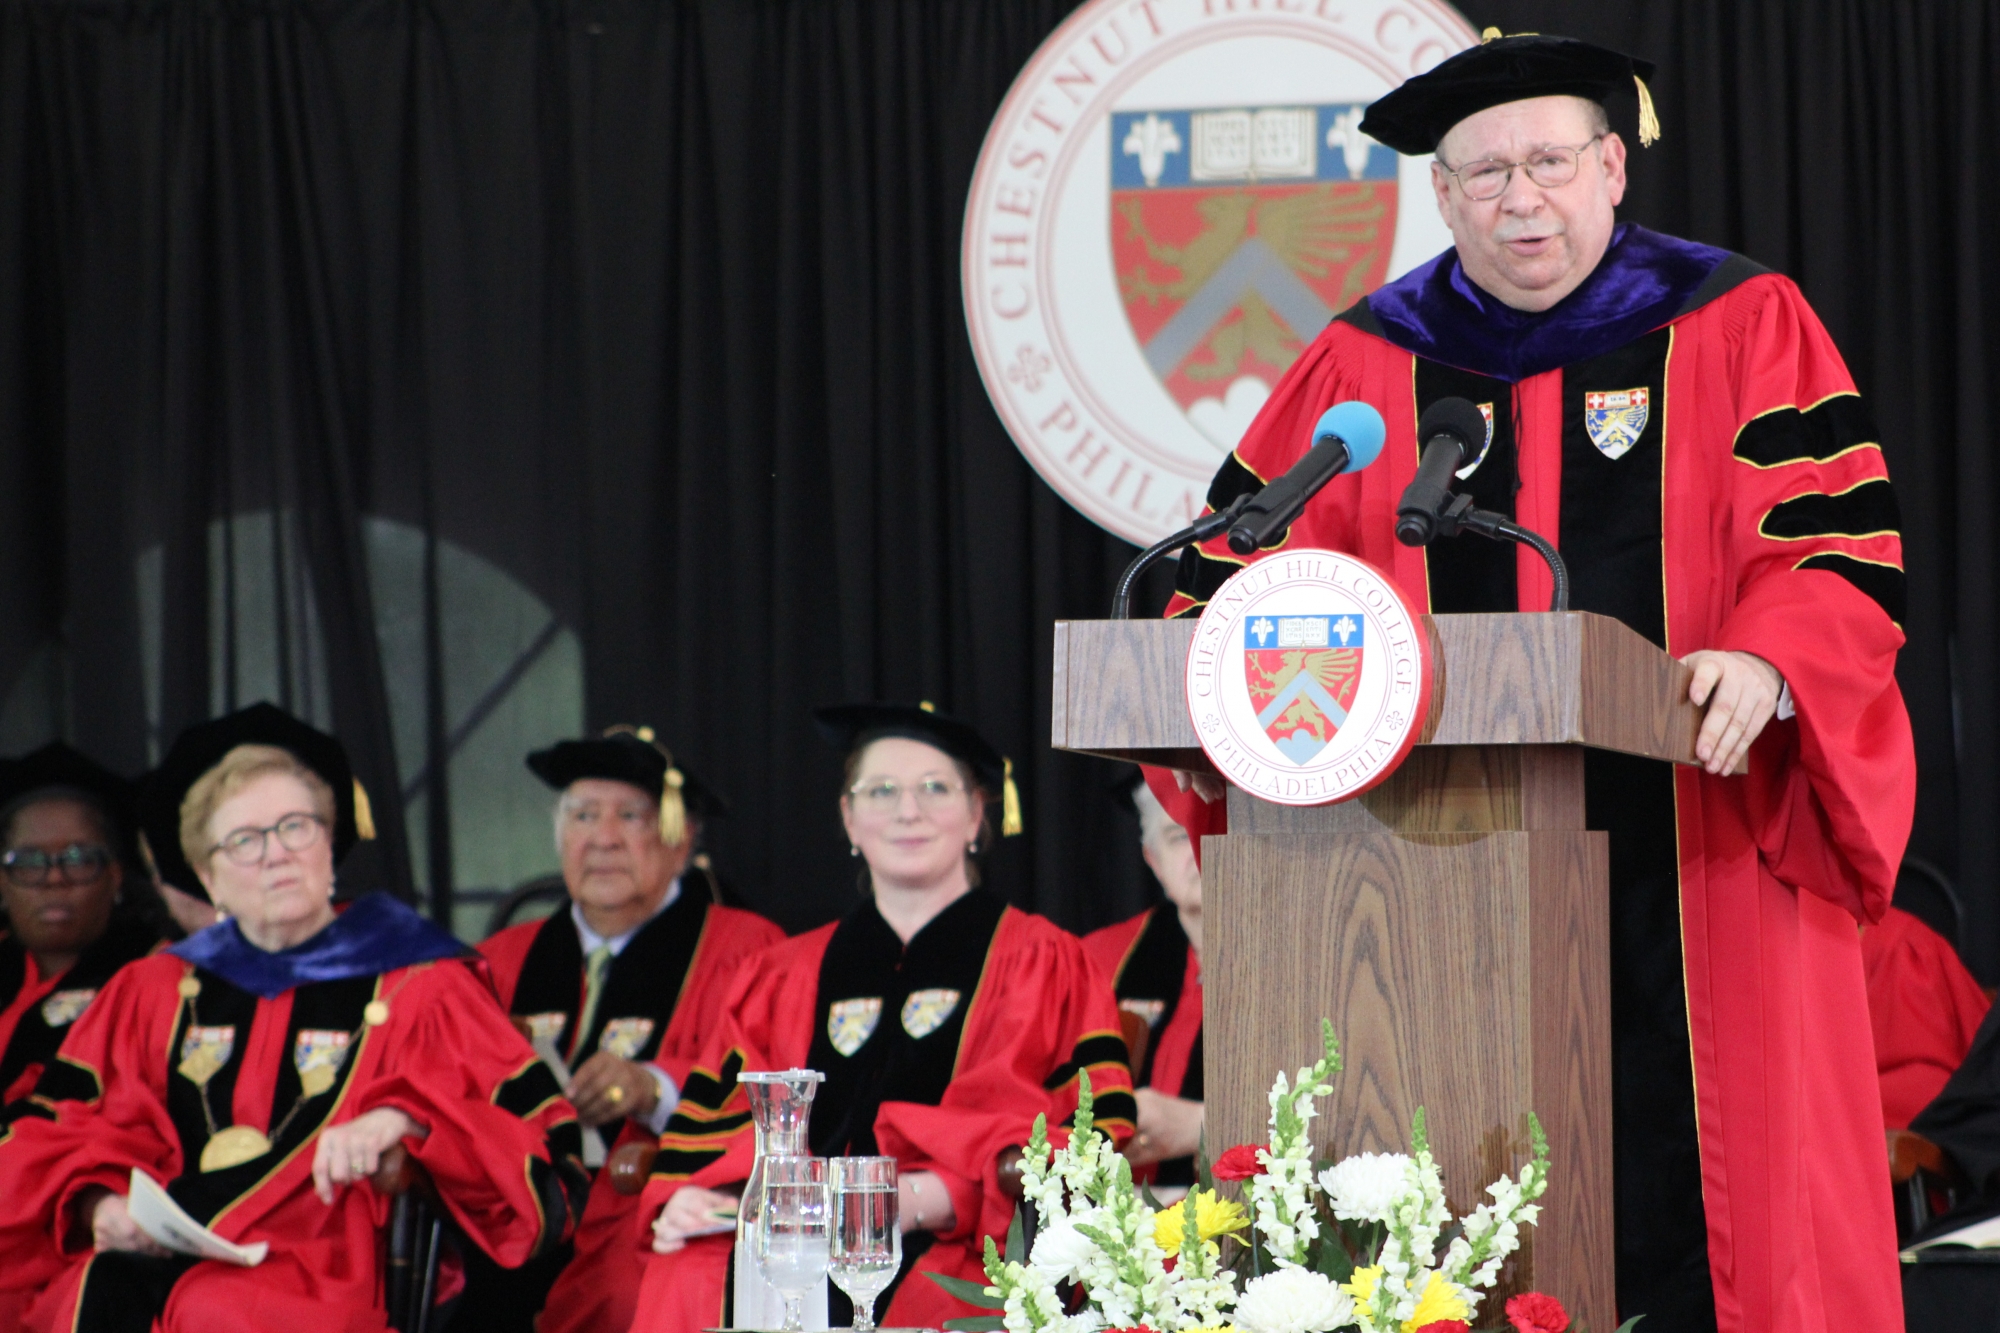 In his Commencement Address, Ambassador David Cohen injected humor and wisdom as he advised graduates not to miss out on life's many opportunities.